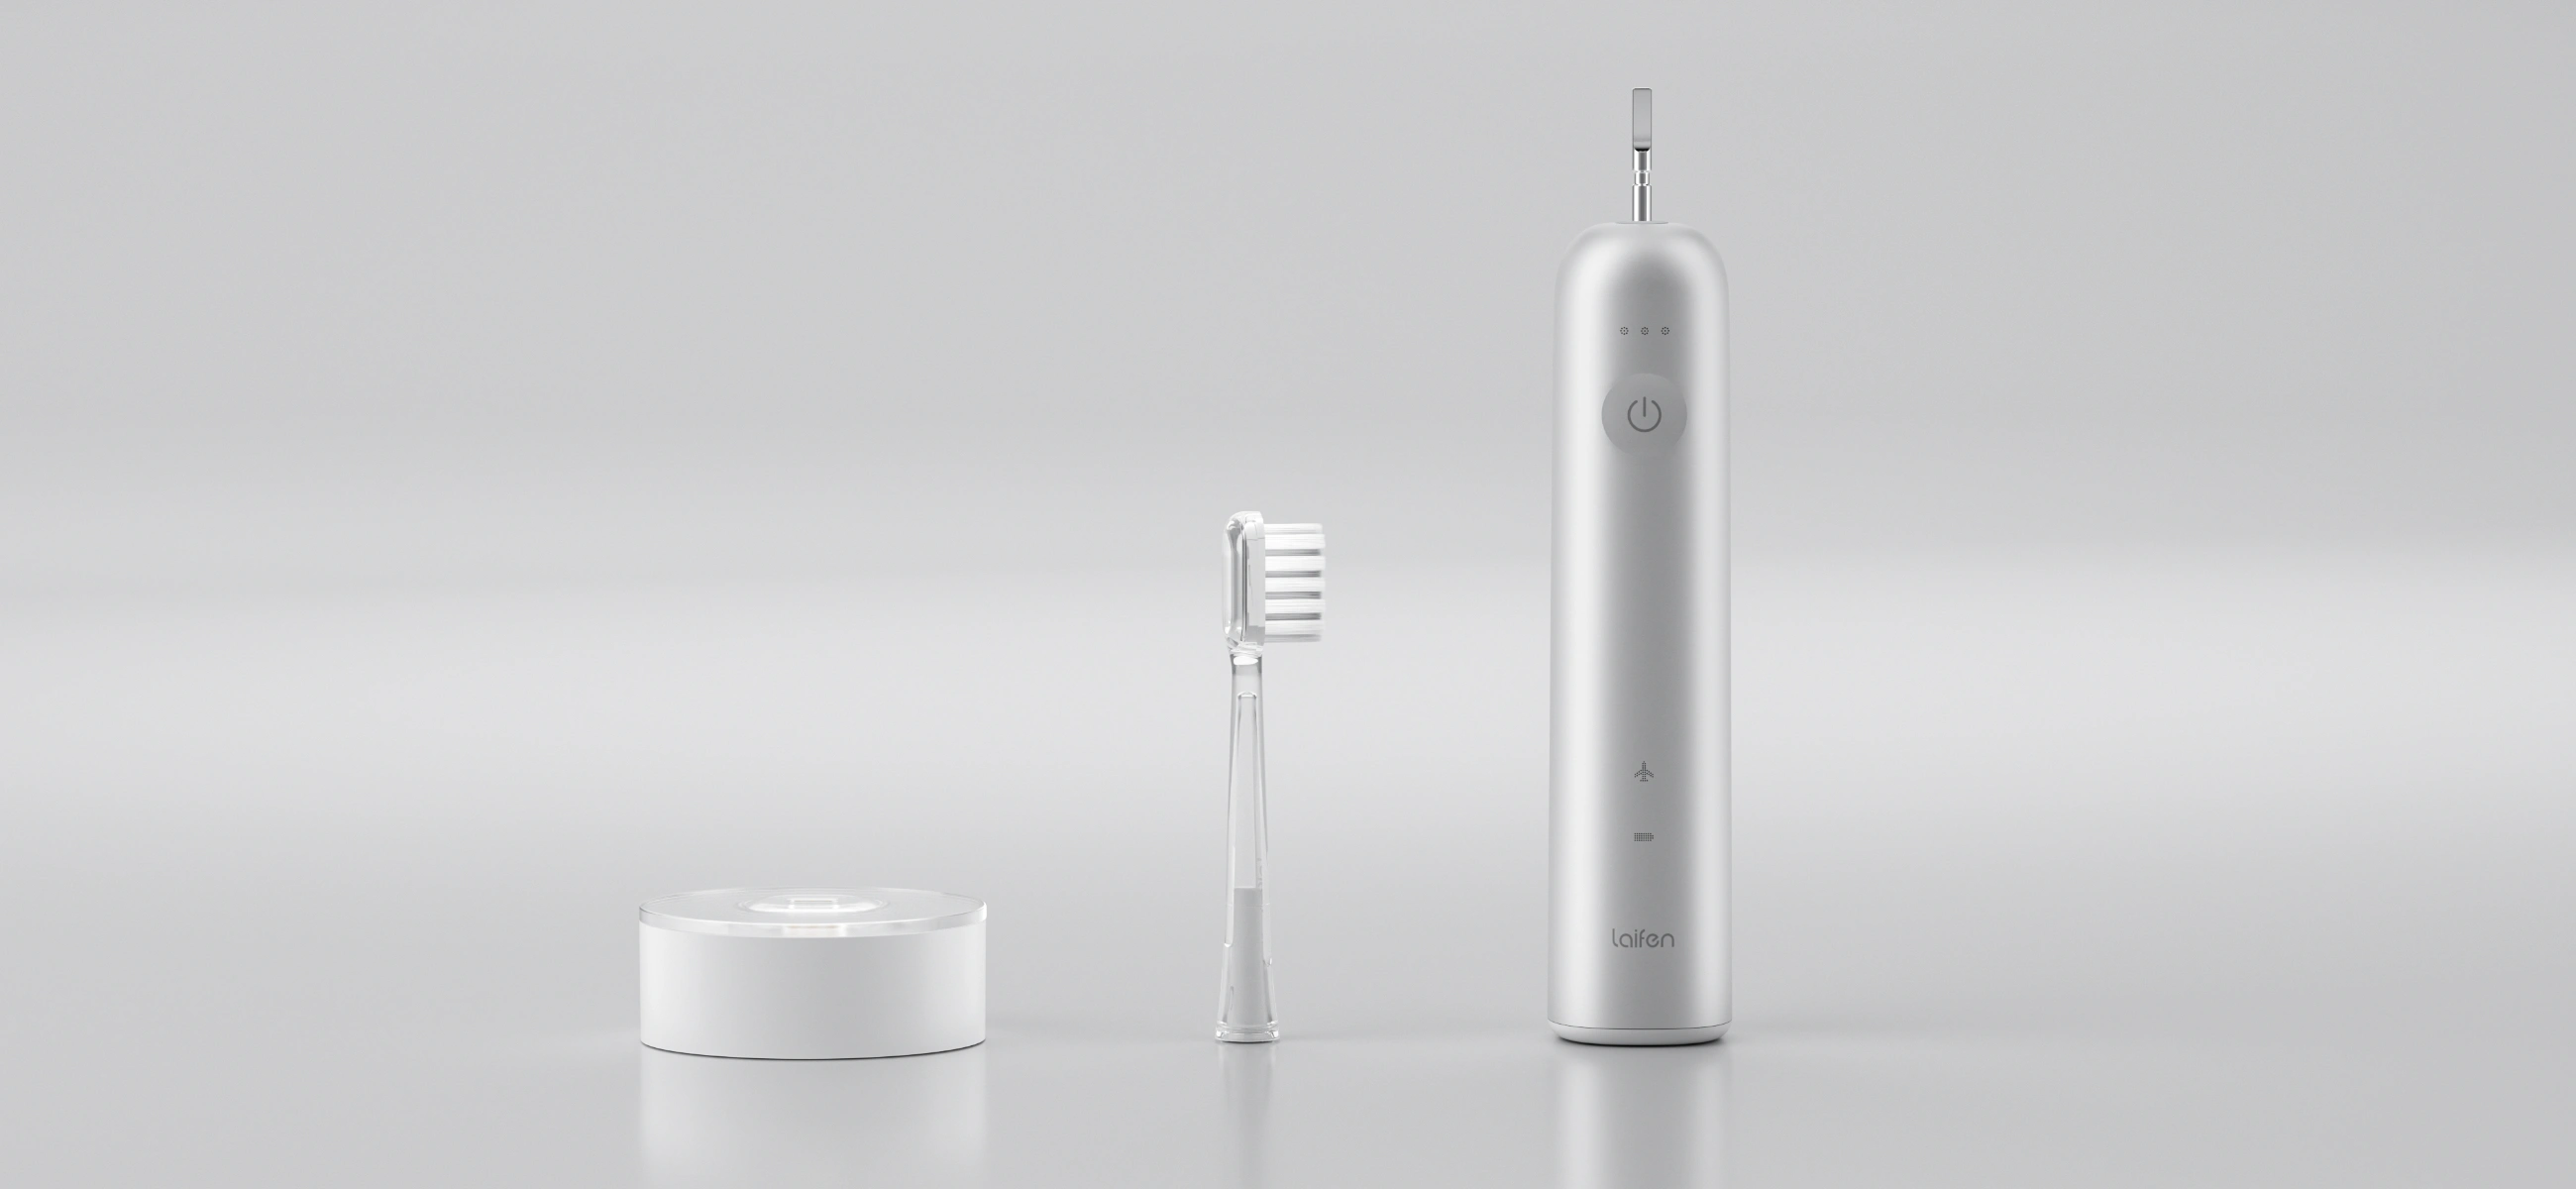 The best affordable electric toothbrush: which toothbrush is right for you?